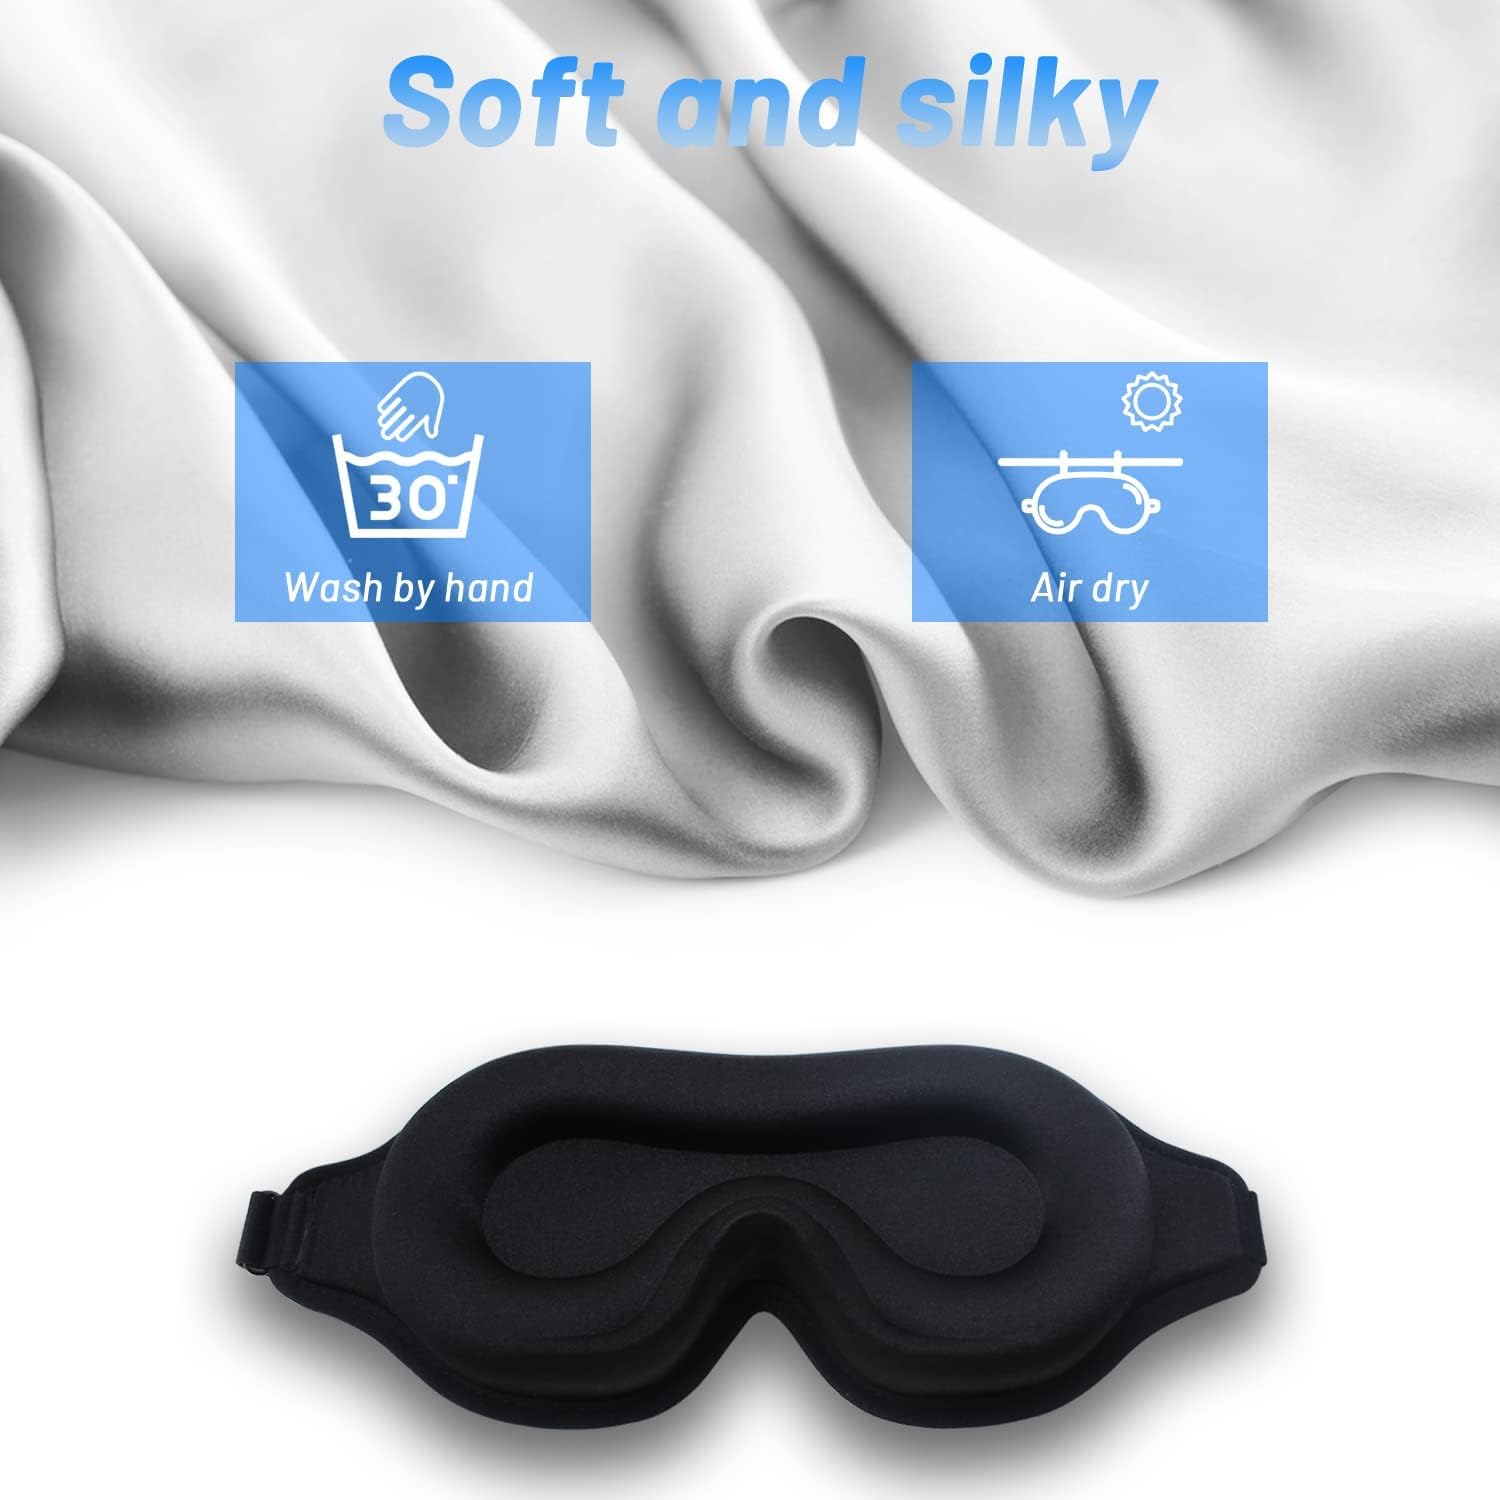 Albatross Health New England Sleep Mask for Men Women, Upgraded 3D Contoured Cup Eye mask with Adjustable Strap, Breathable  Soft for Sleeping, Yoga, Traveling (Black)